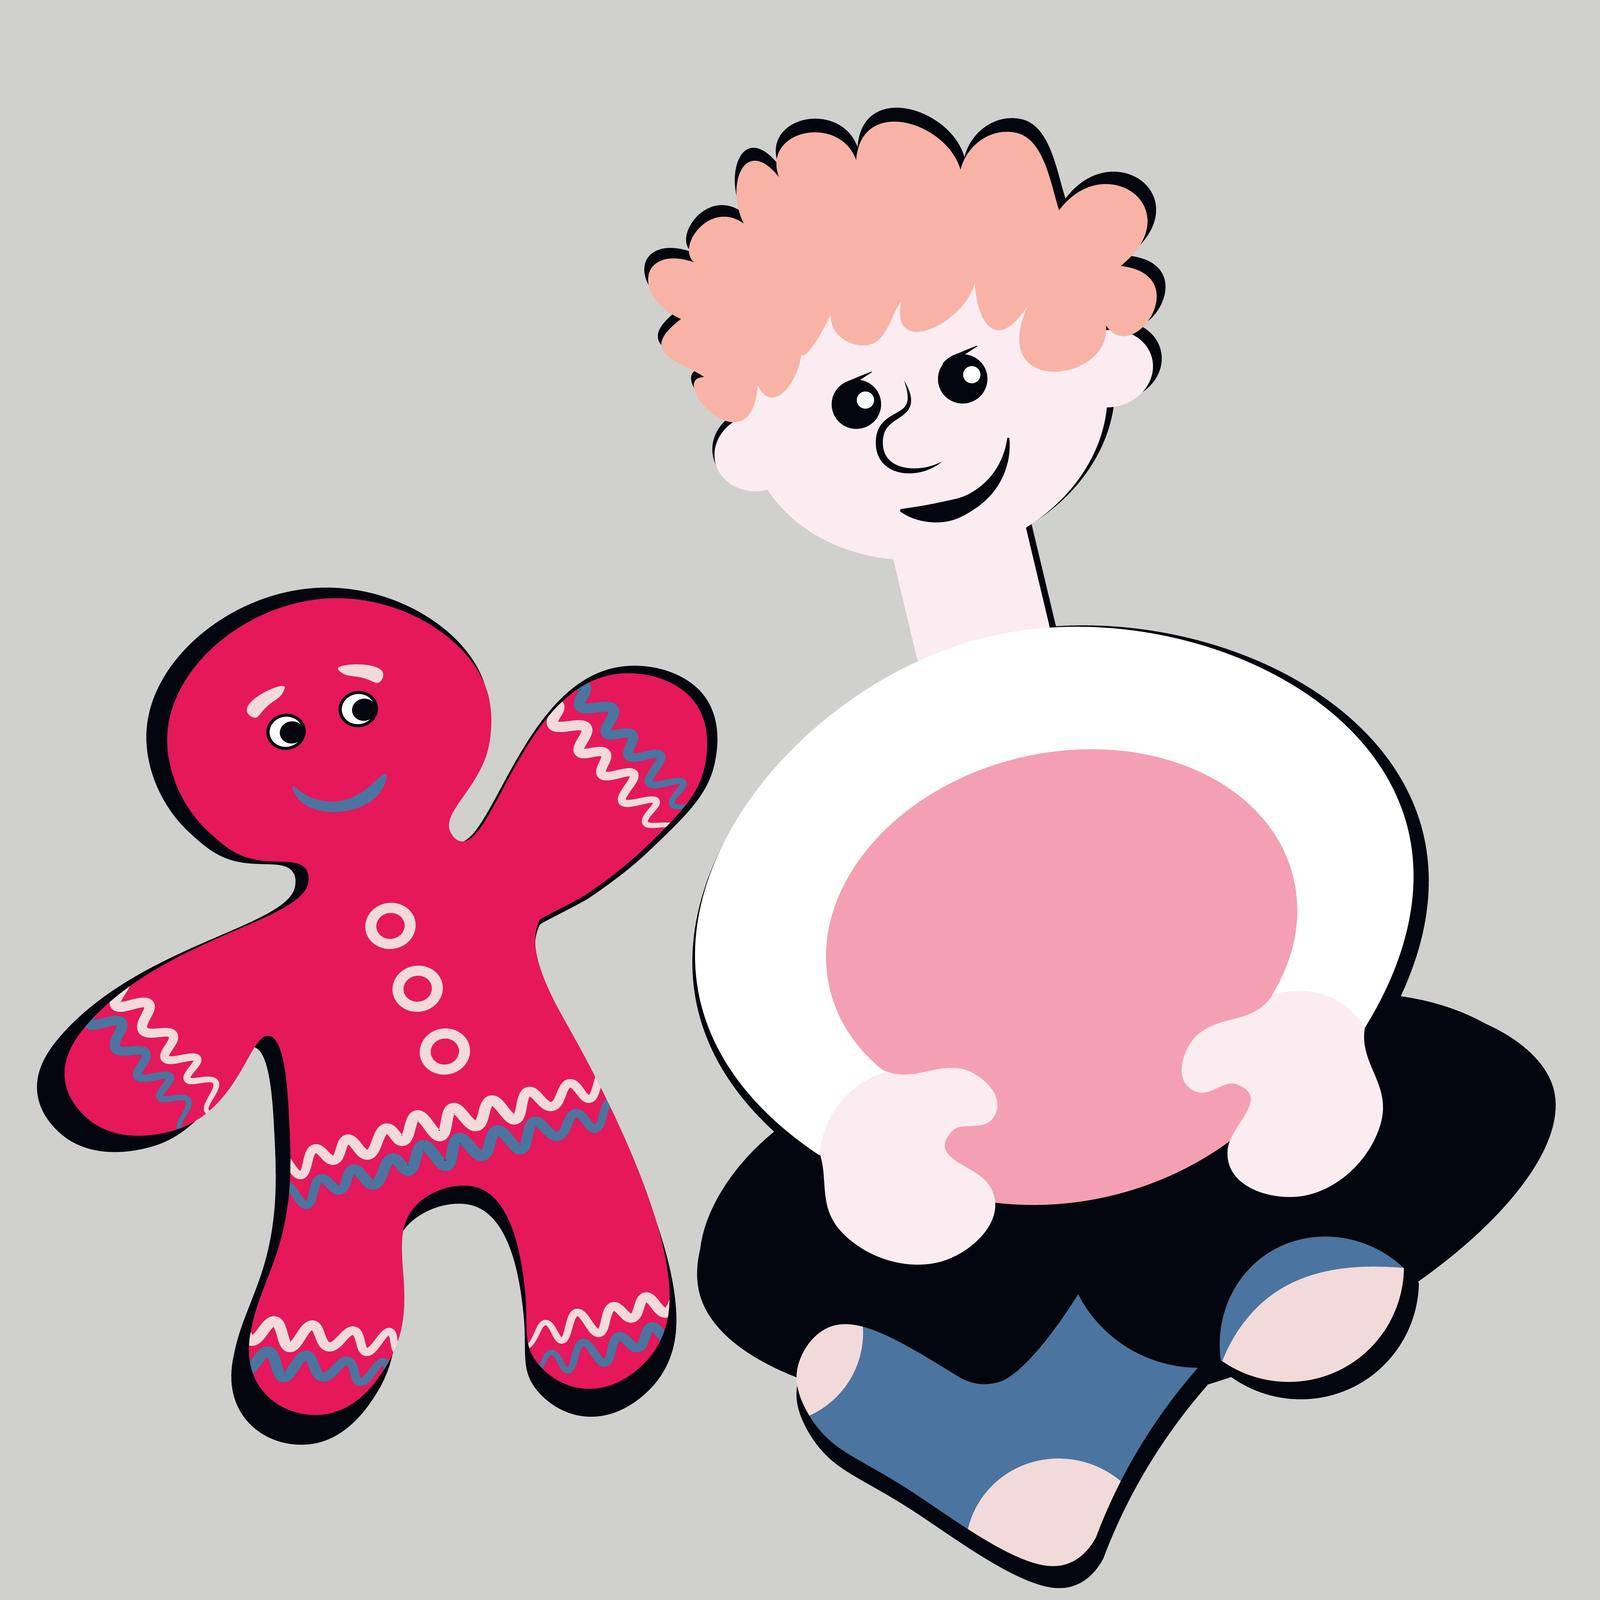 the boy sits cross-legged and smiles at the gingerbread man. Design element by p-i-r-a-n-y-a